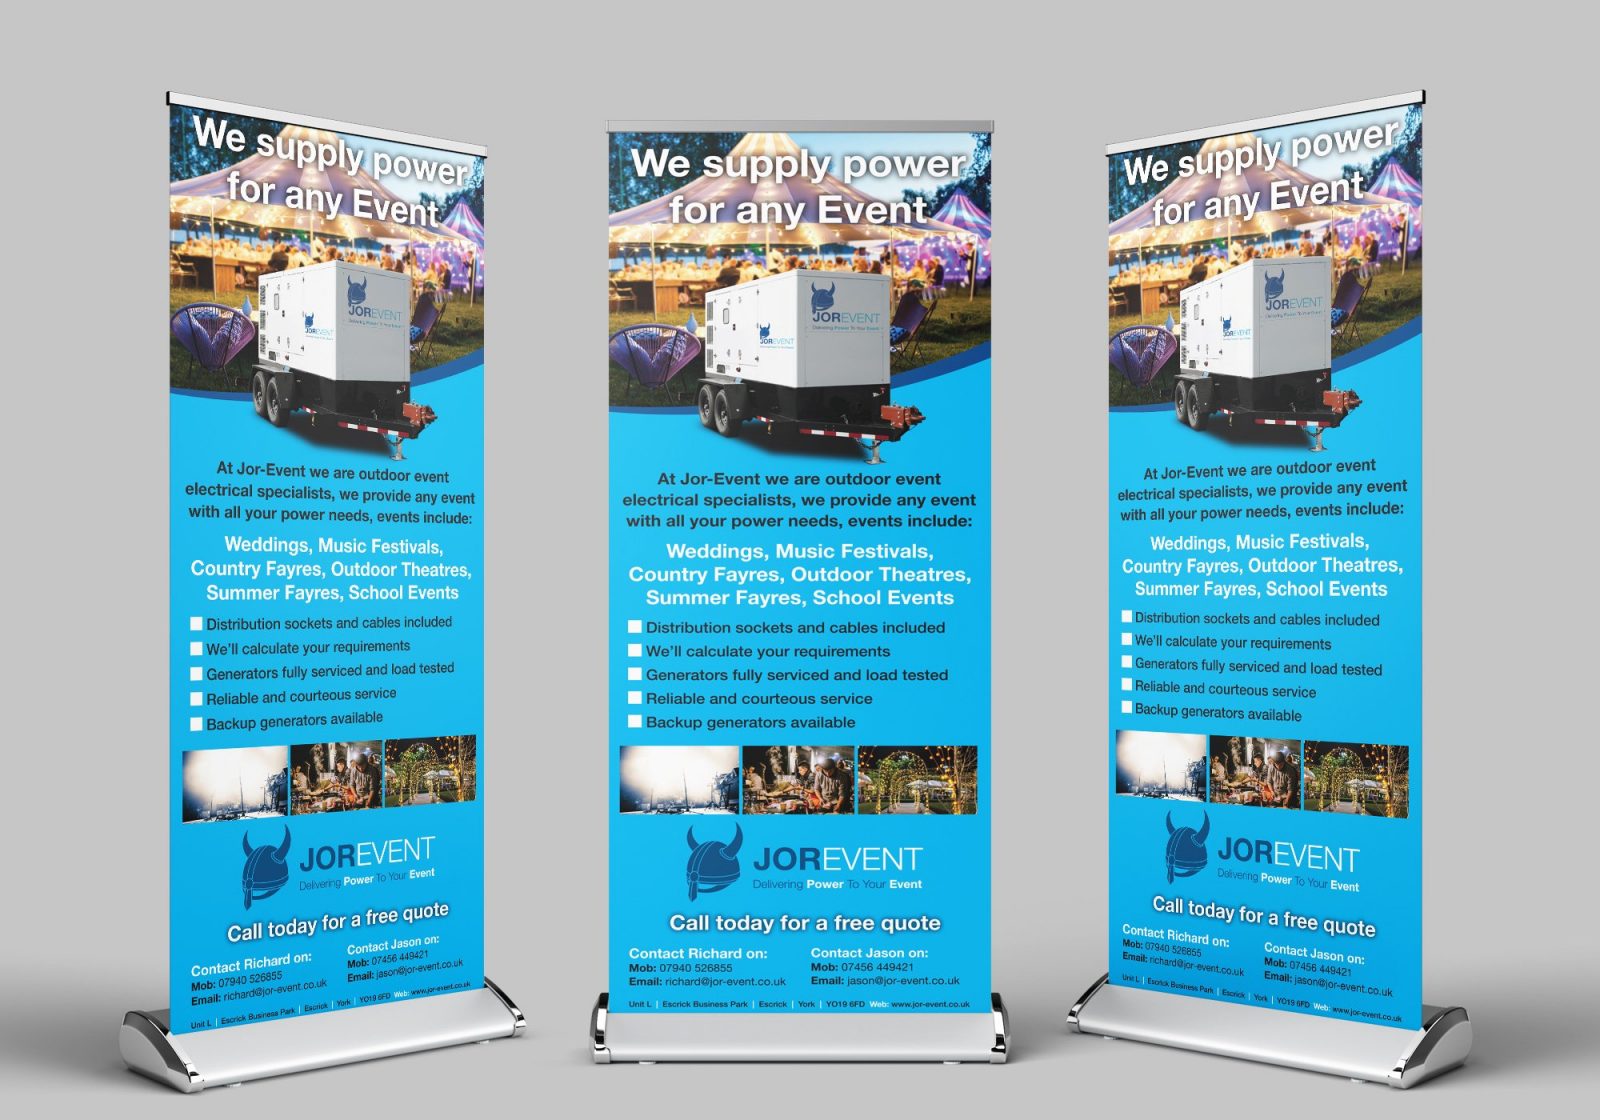 Three roller banners showing the design for Jor-Event generator hire